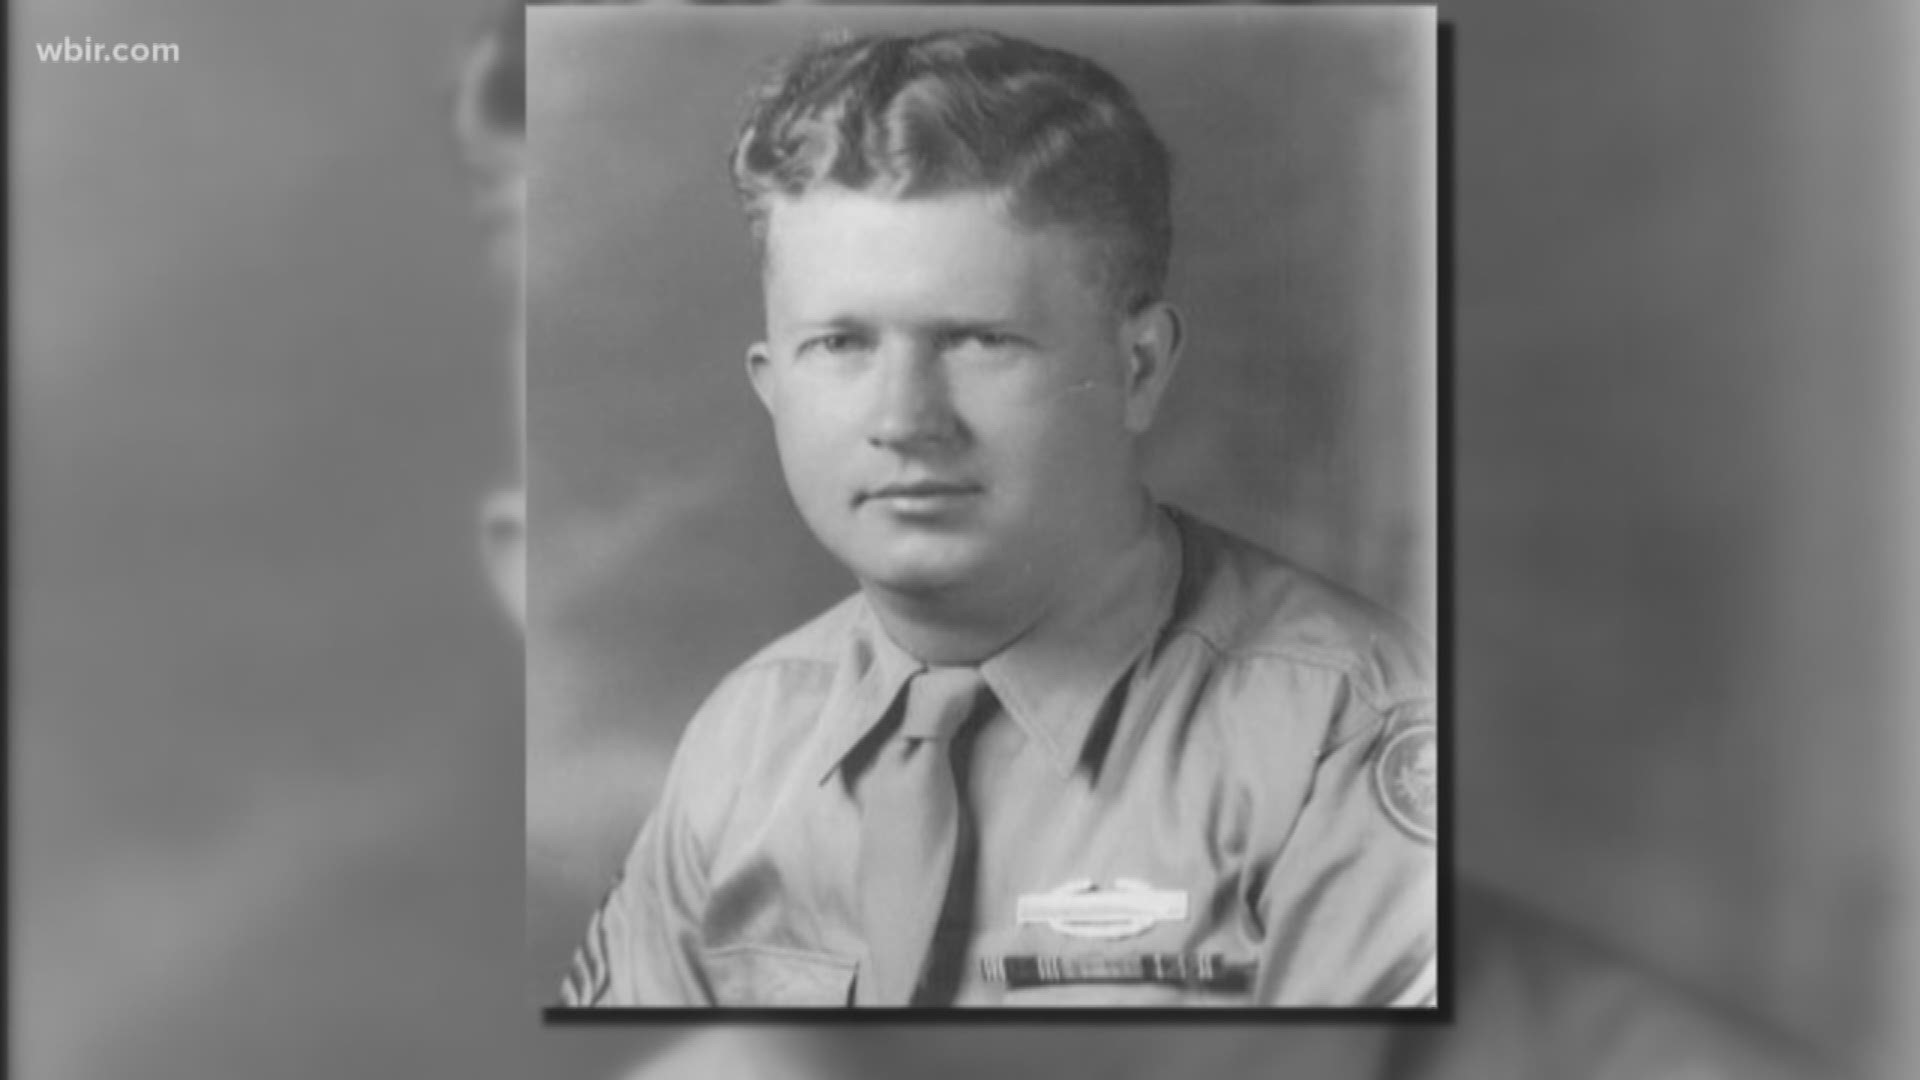 A Knoxville veteran of World War II is up for the highest civilian medal awarded by Congress.